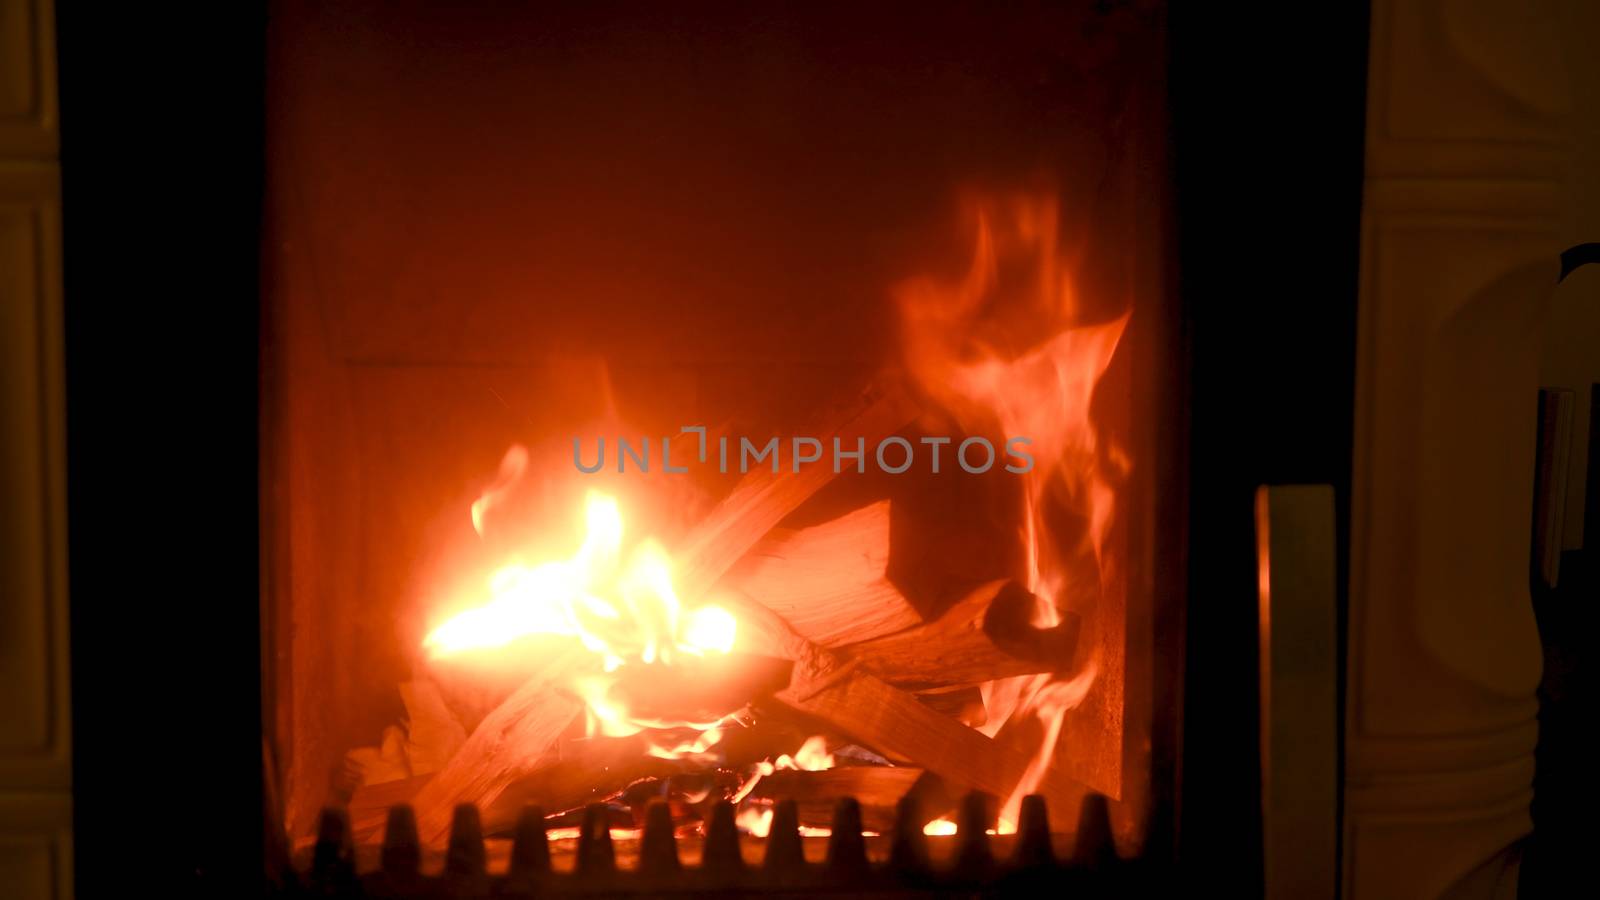 Fire in stove, close up, firewood burning by asafaric